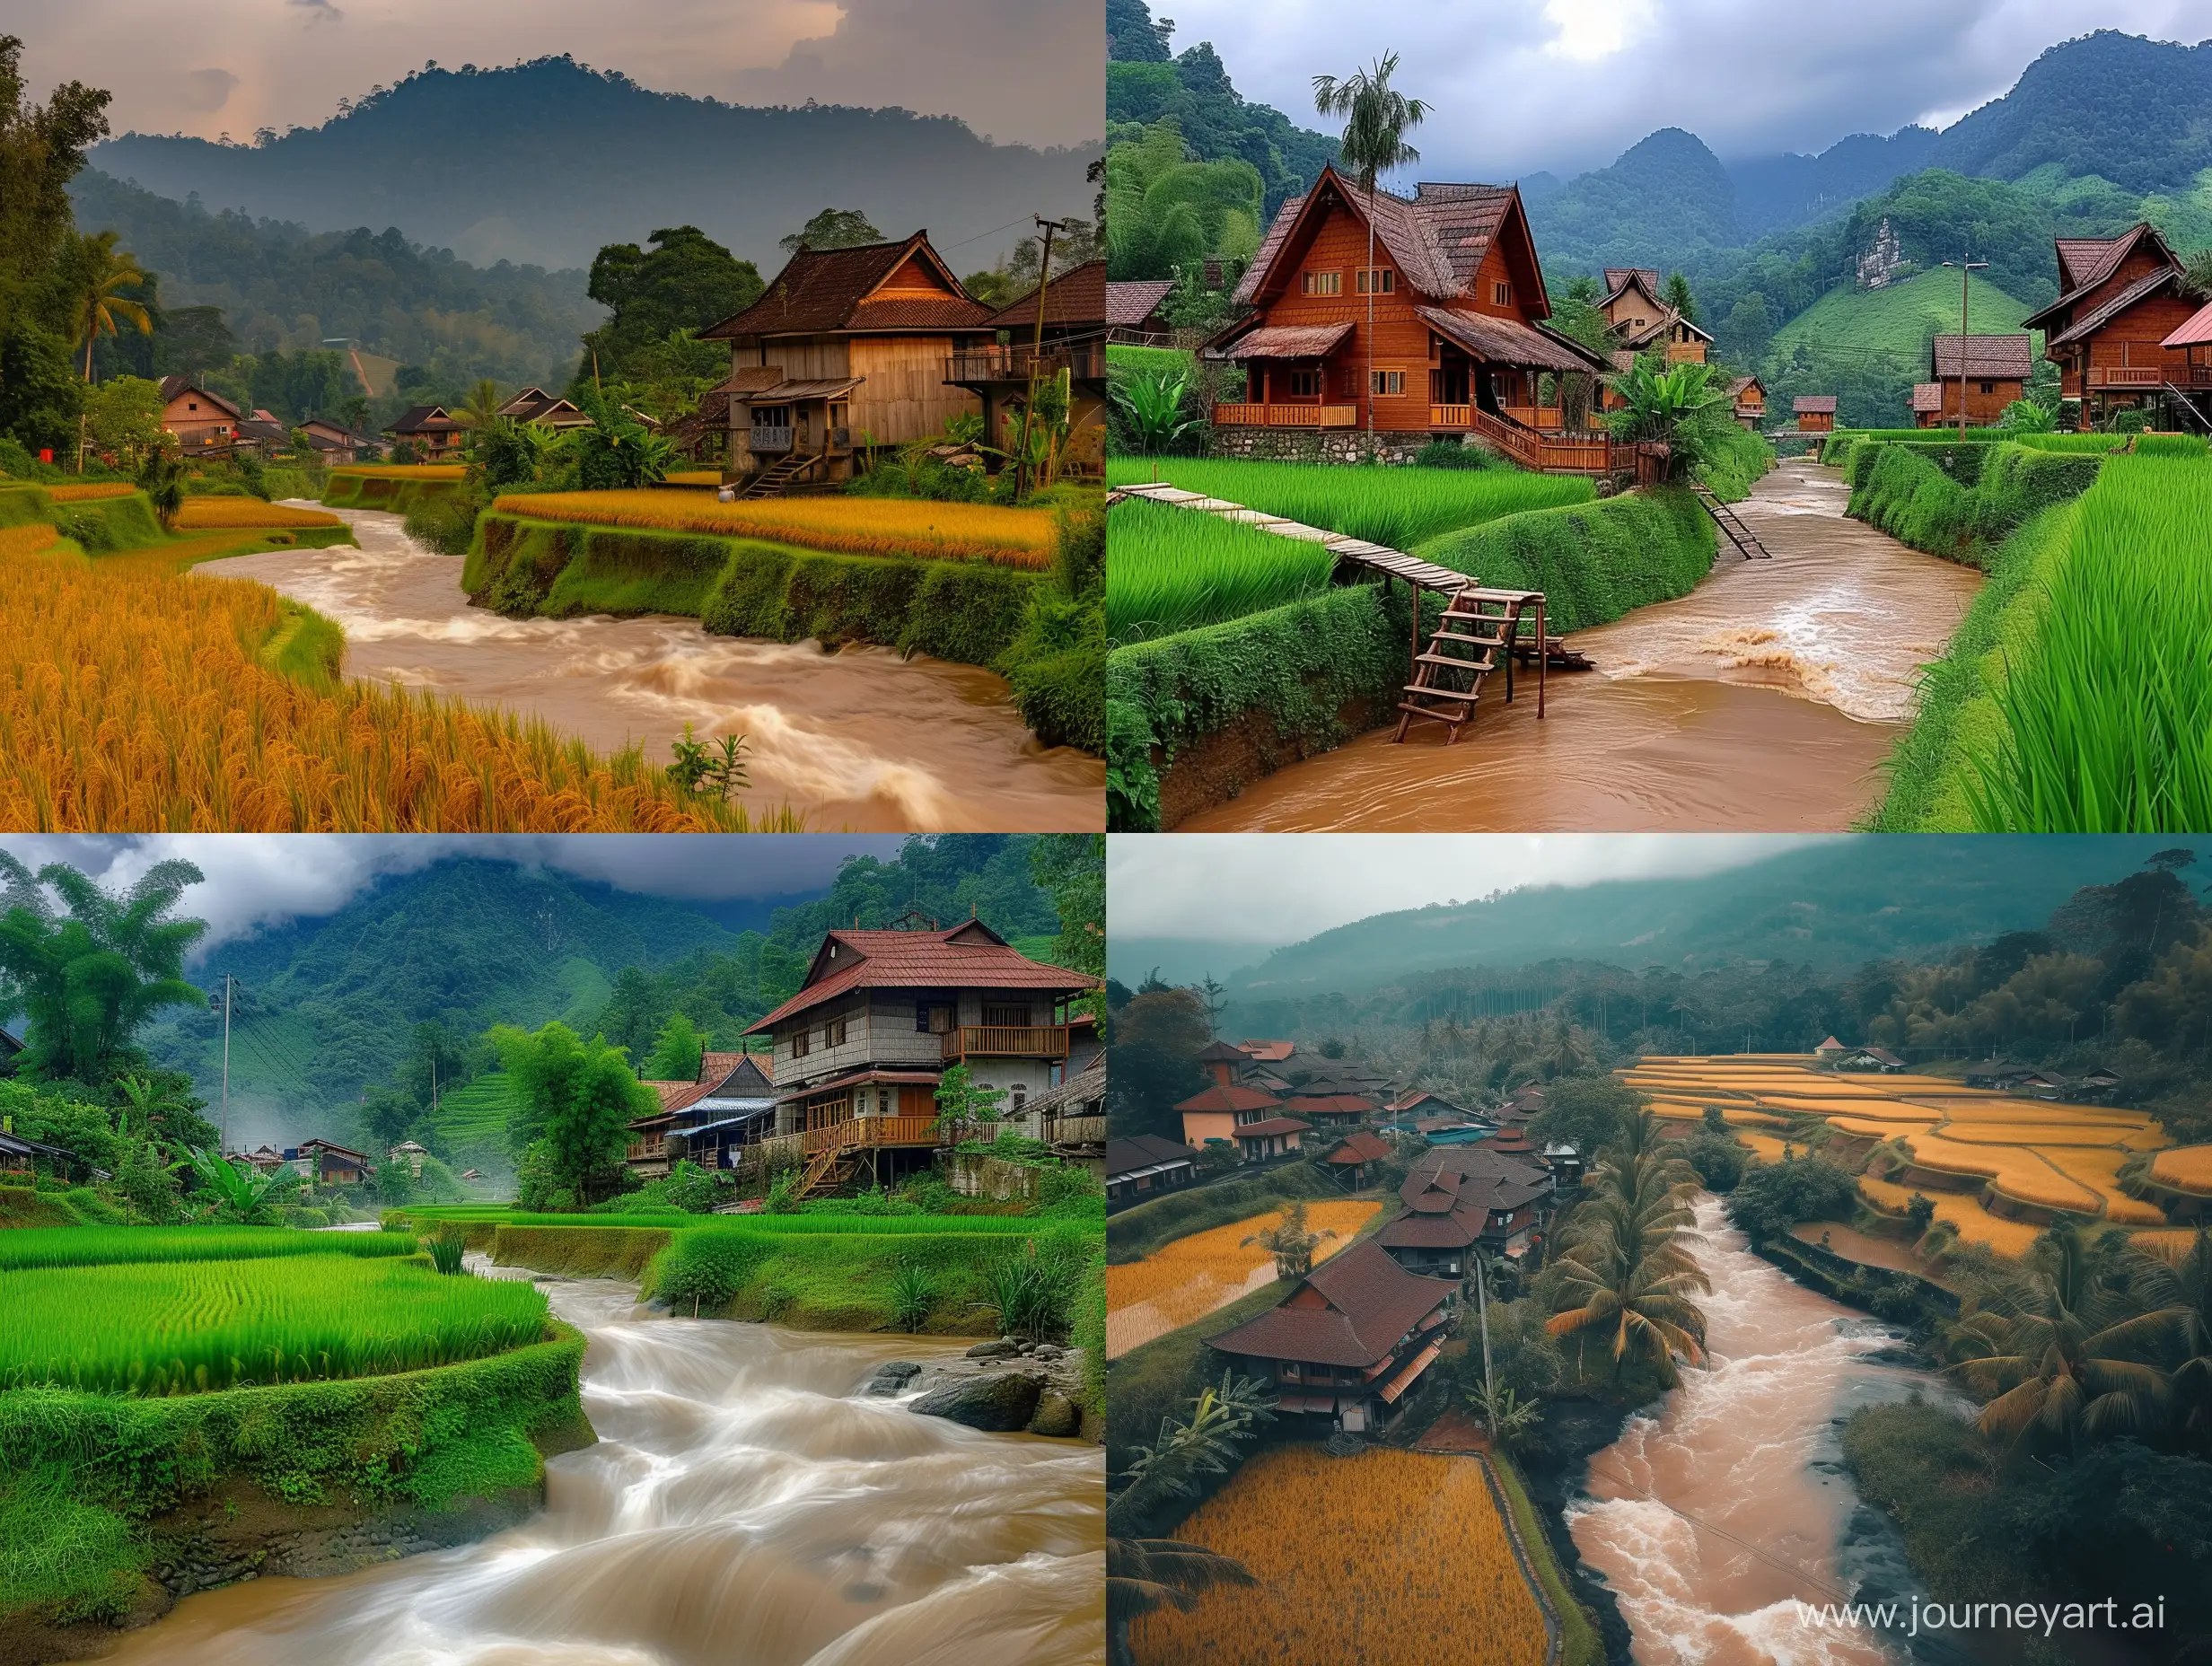 Scenic-Landscape-Rice-Fields-and-Mountainous-Homes-by-Flowing-Rivers